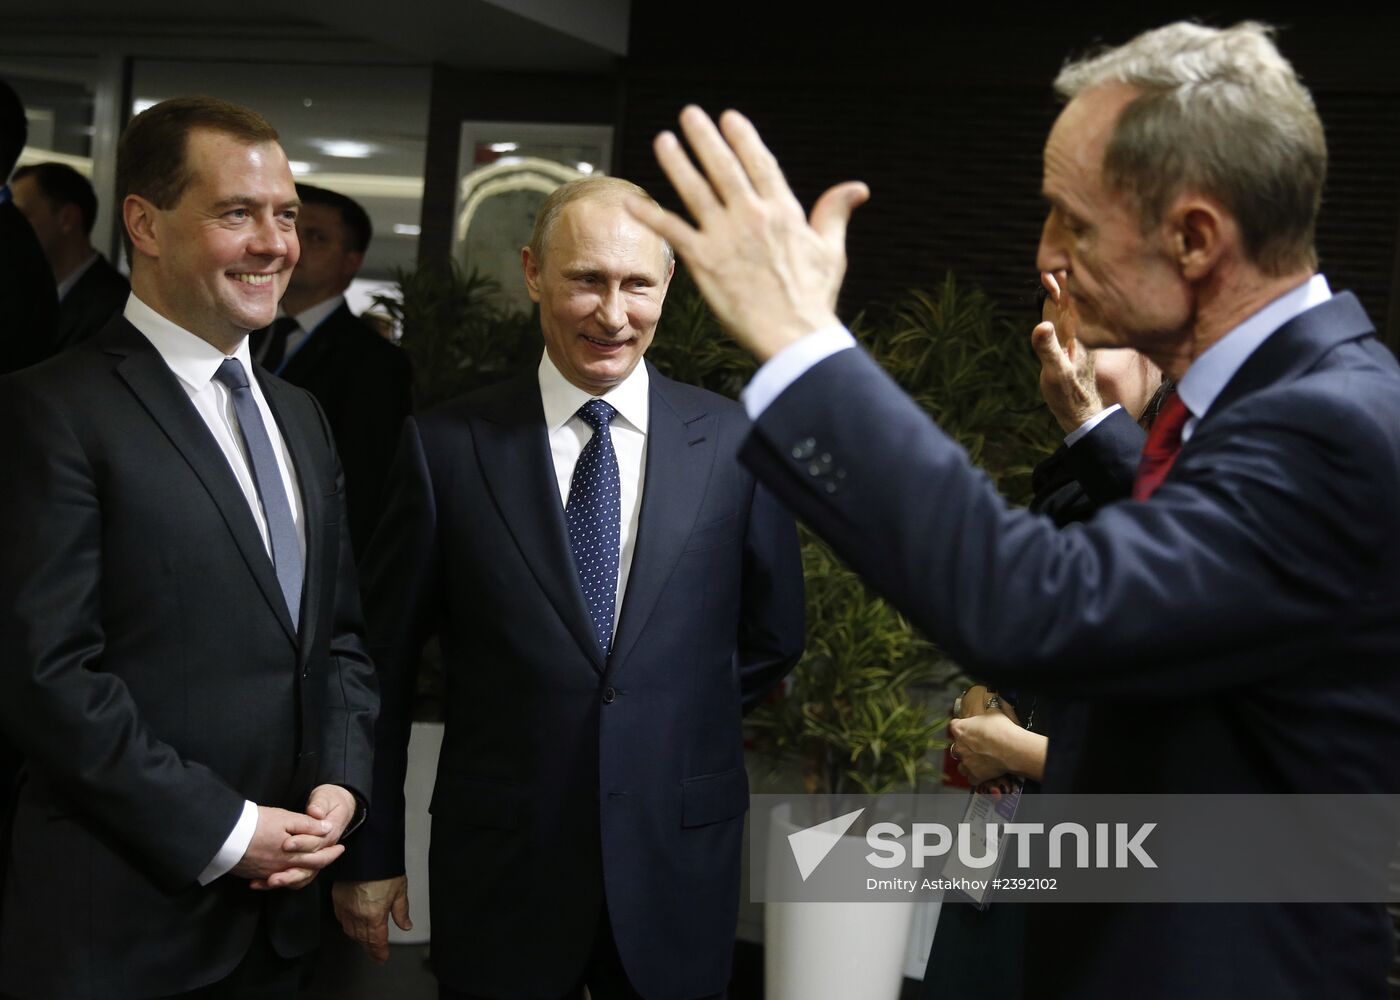 Vladimir Putin and Dmitry Medvedev at opening ceremony of Sochi 2014 Winter Paralympic Games